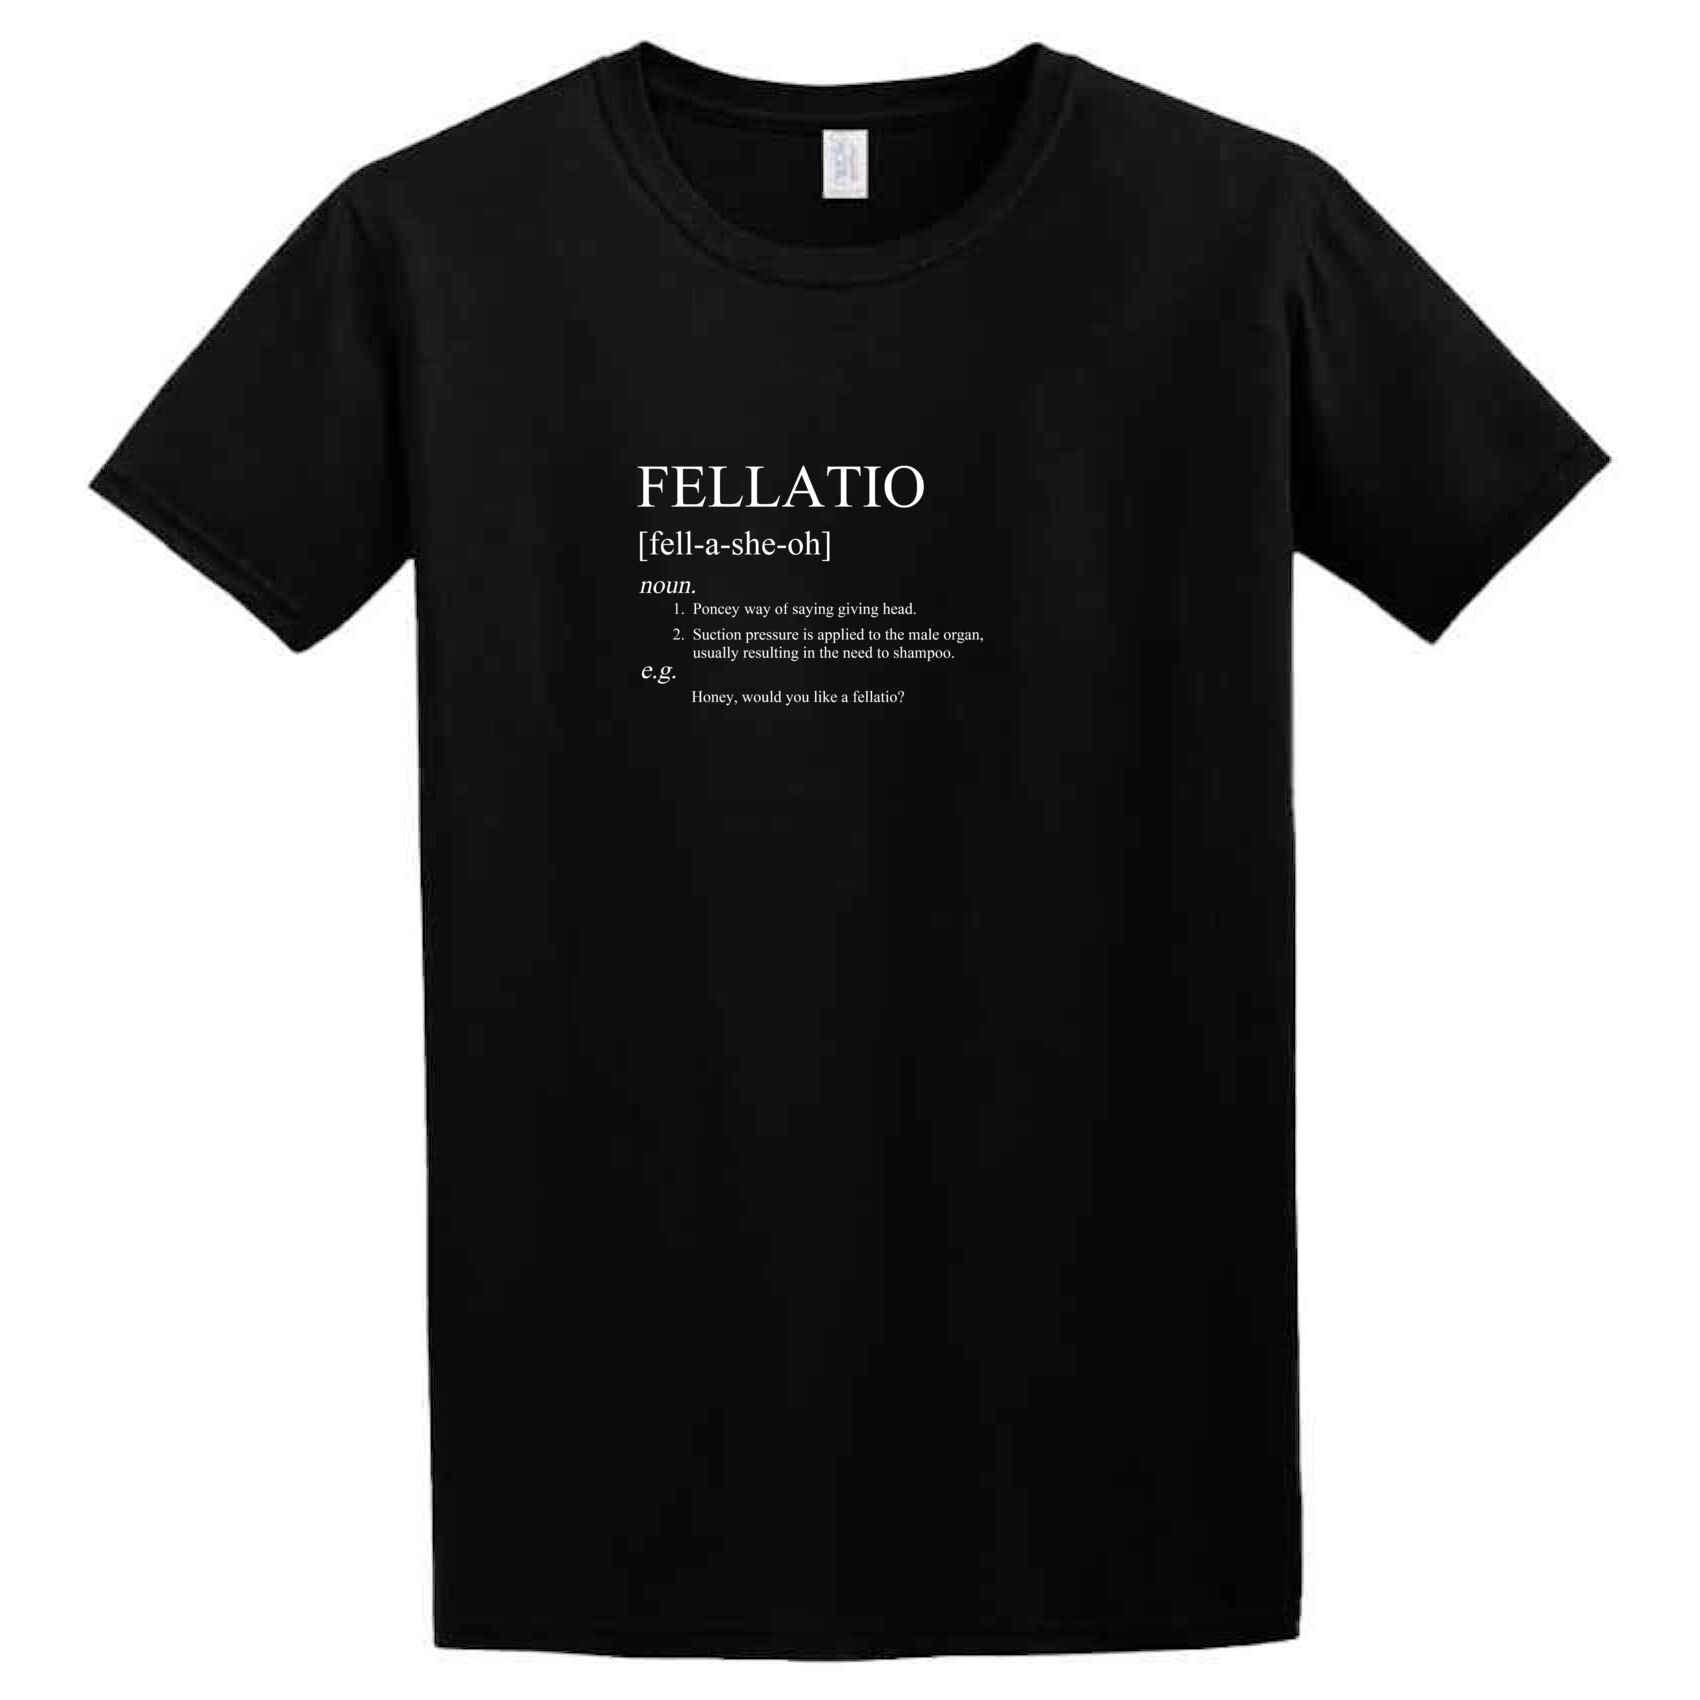 A Fellatio T-Shirt from Twisted Gifts.